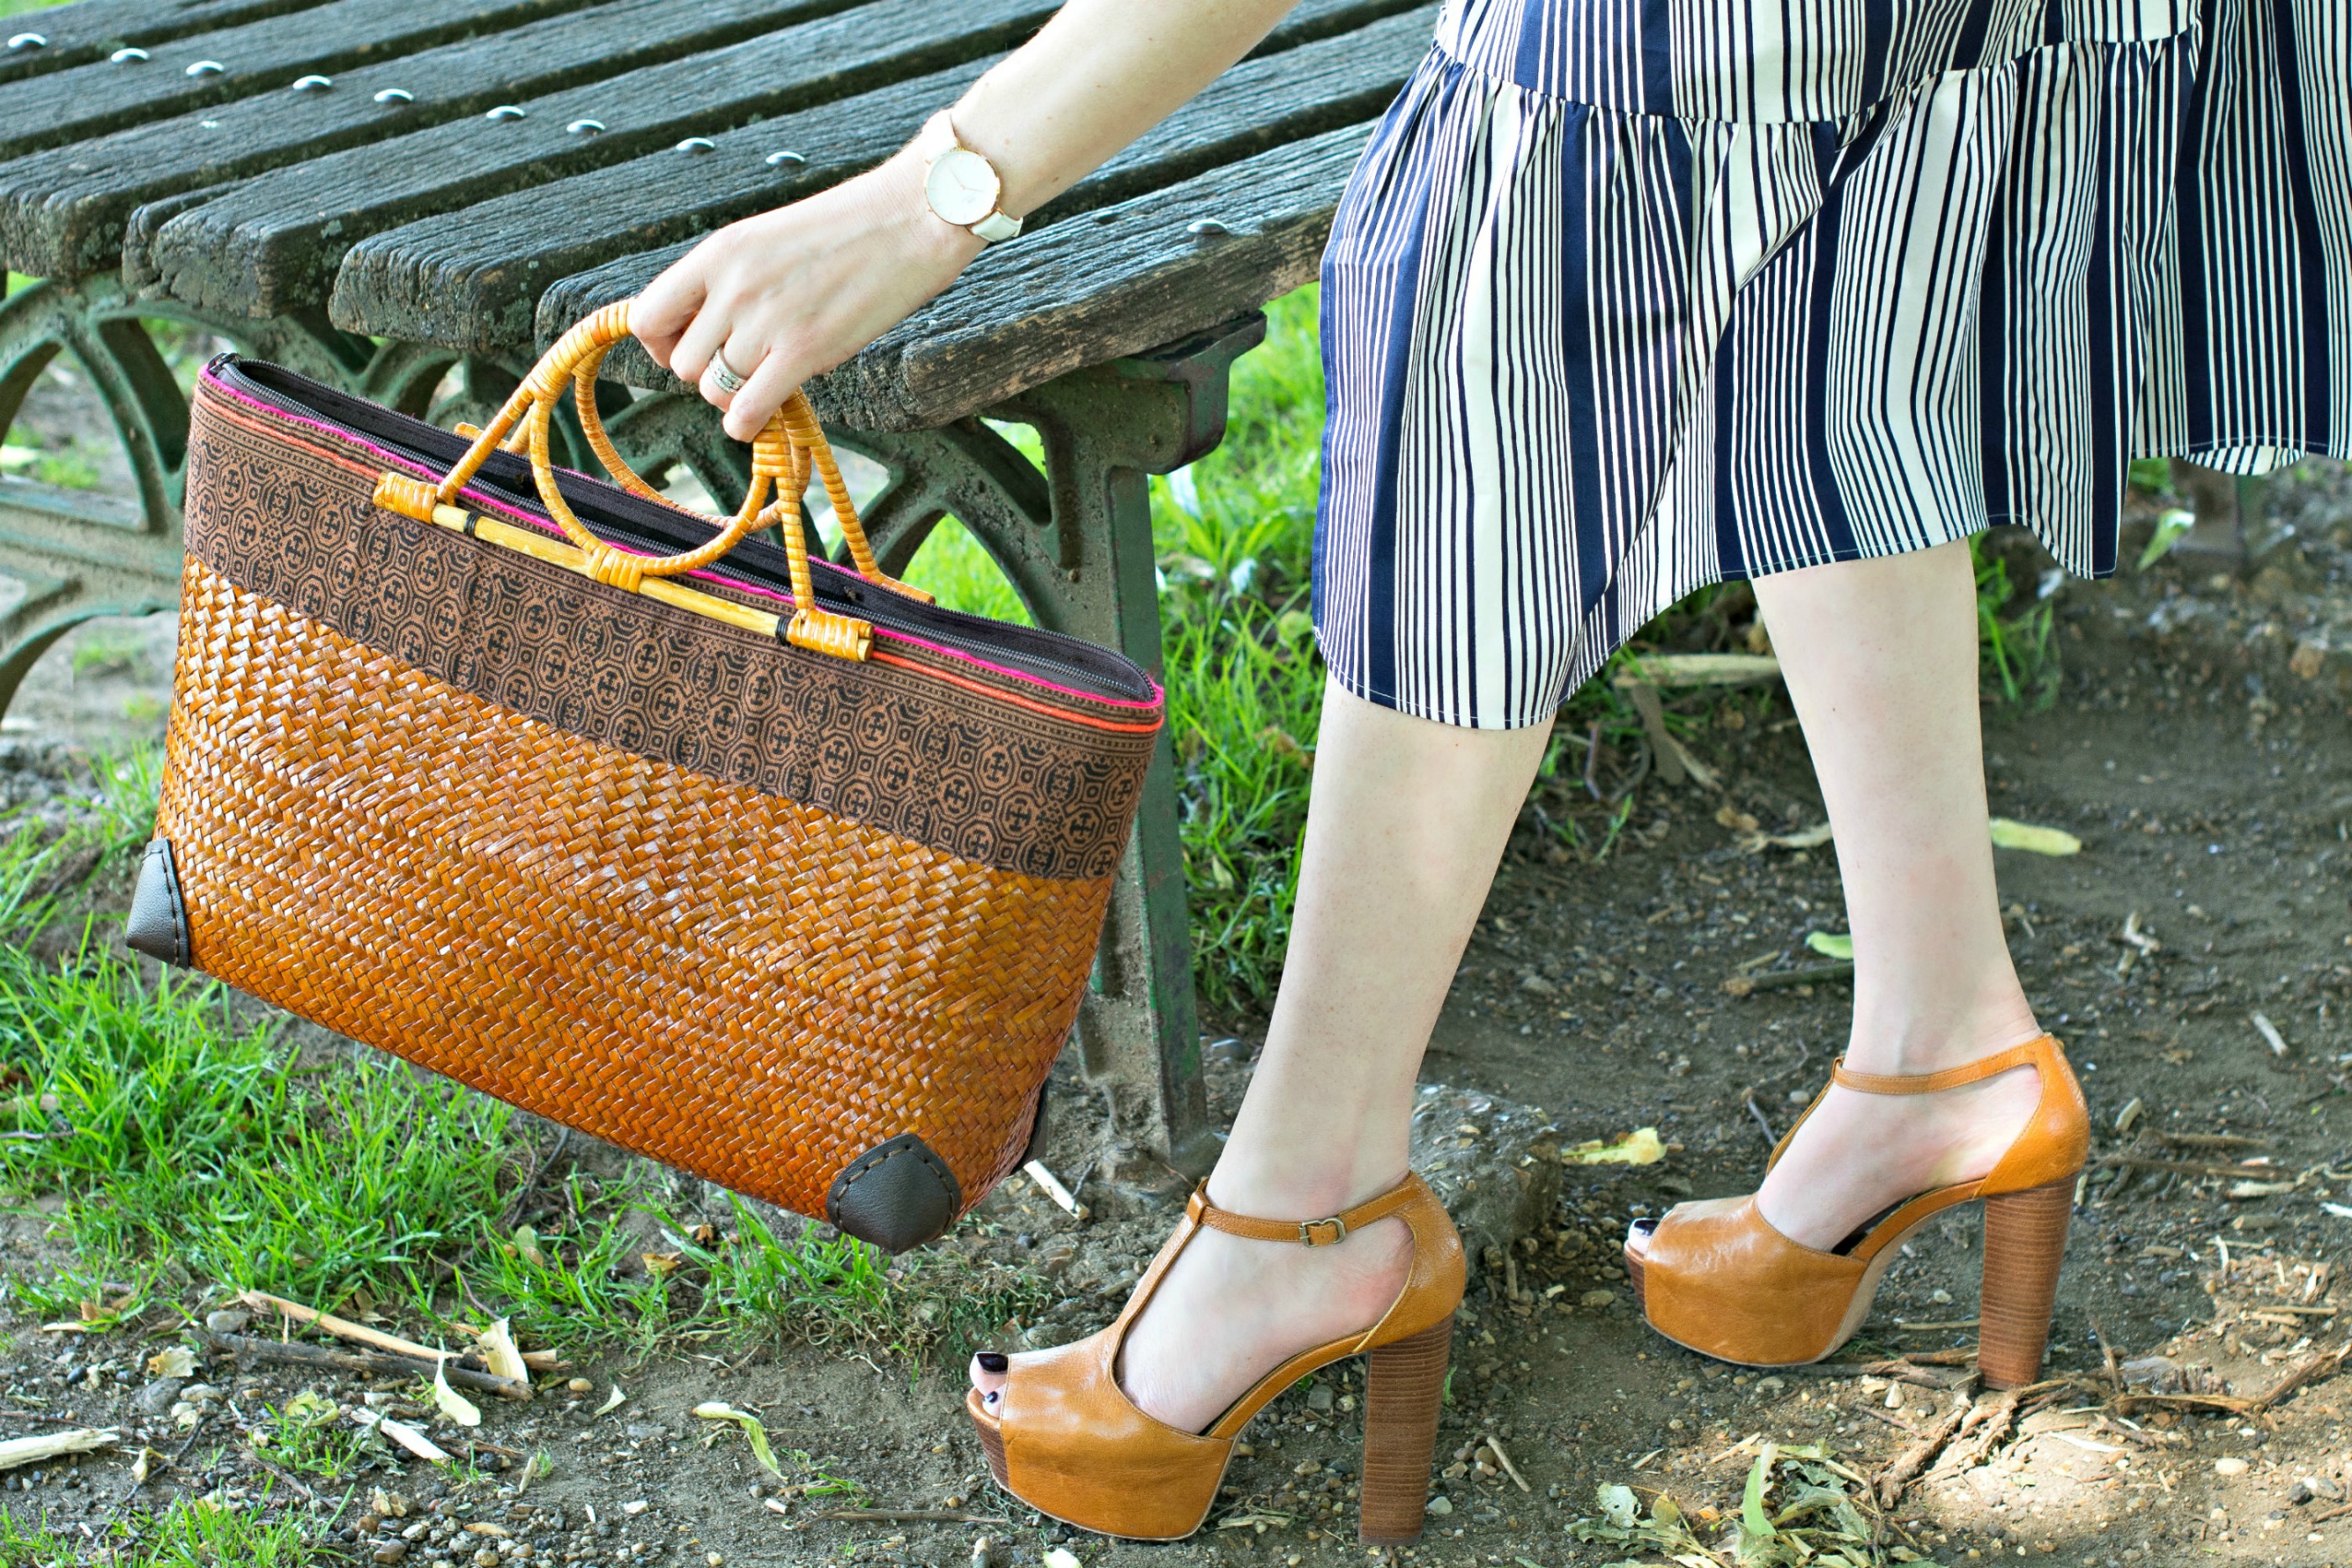 How to work a new trend in your own style | Basket bags and ruffles